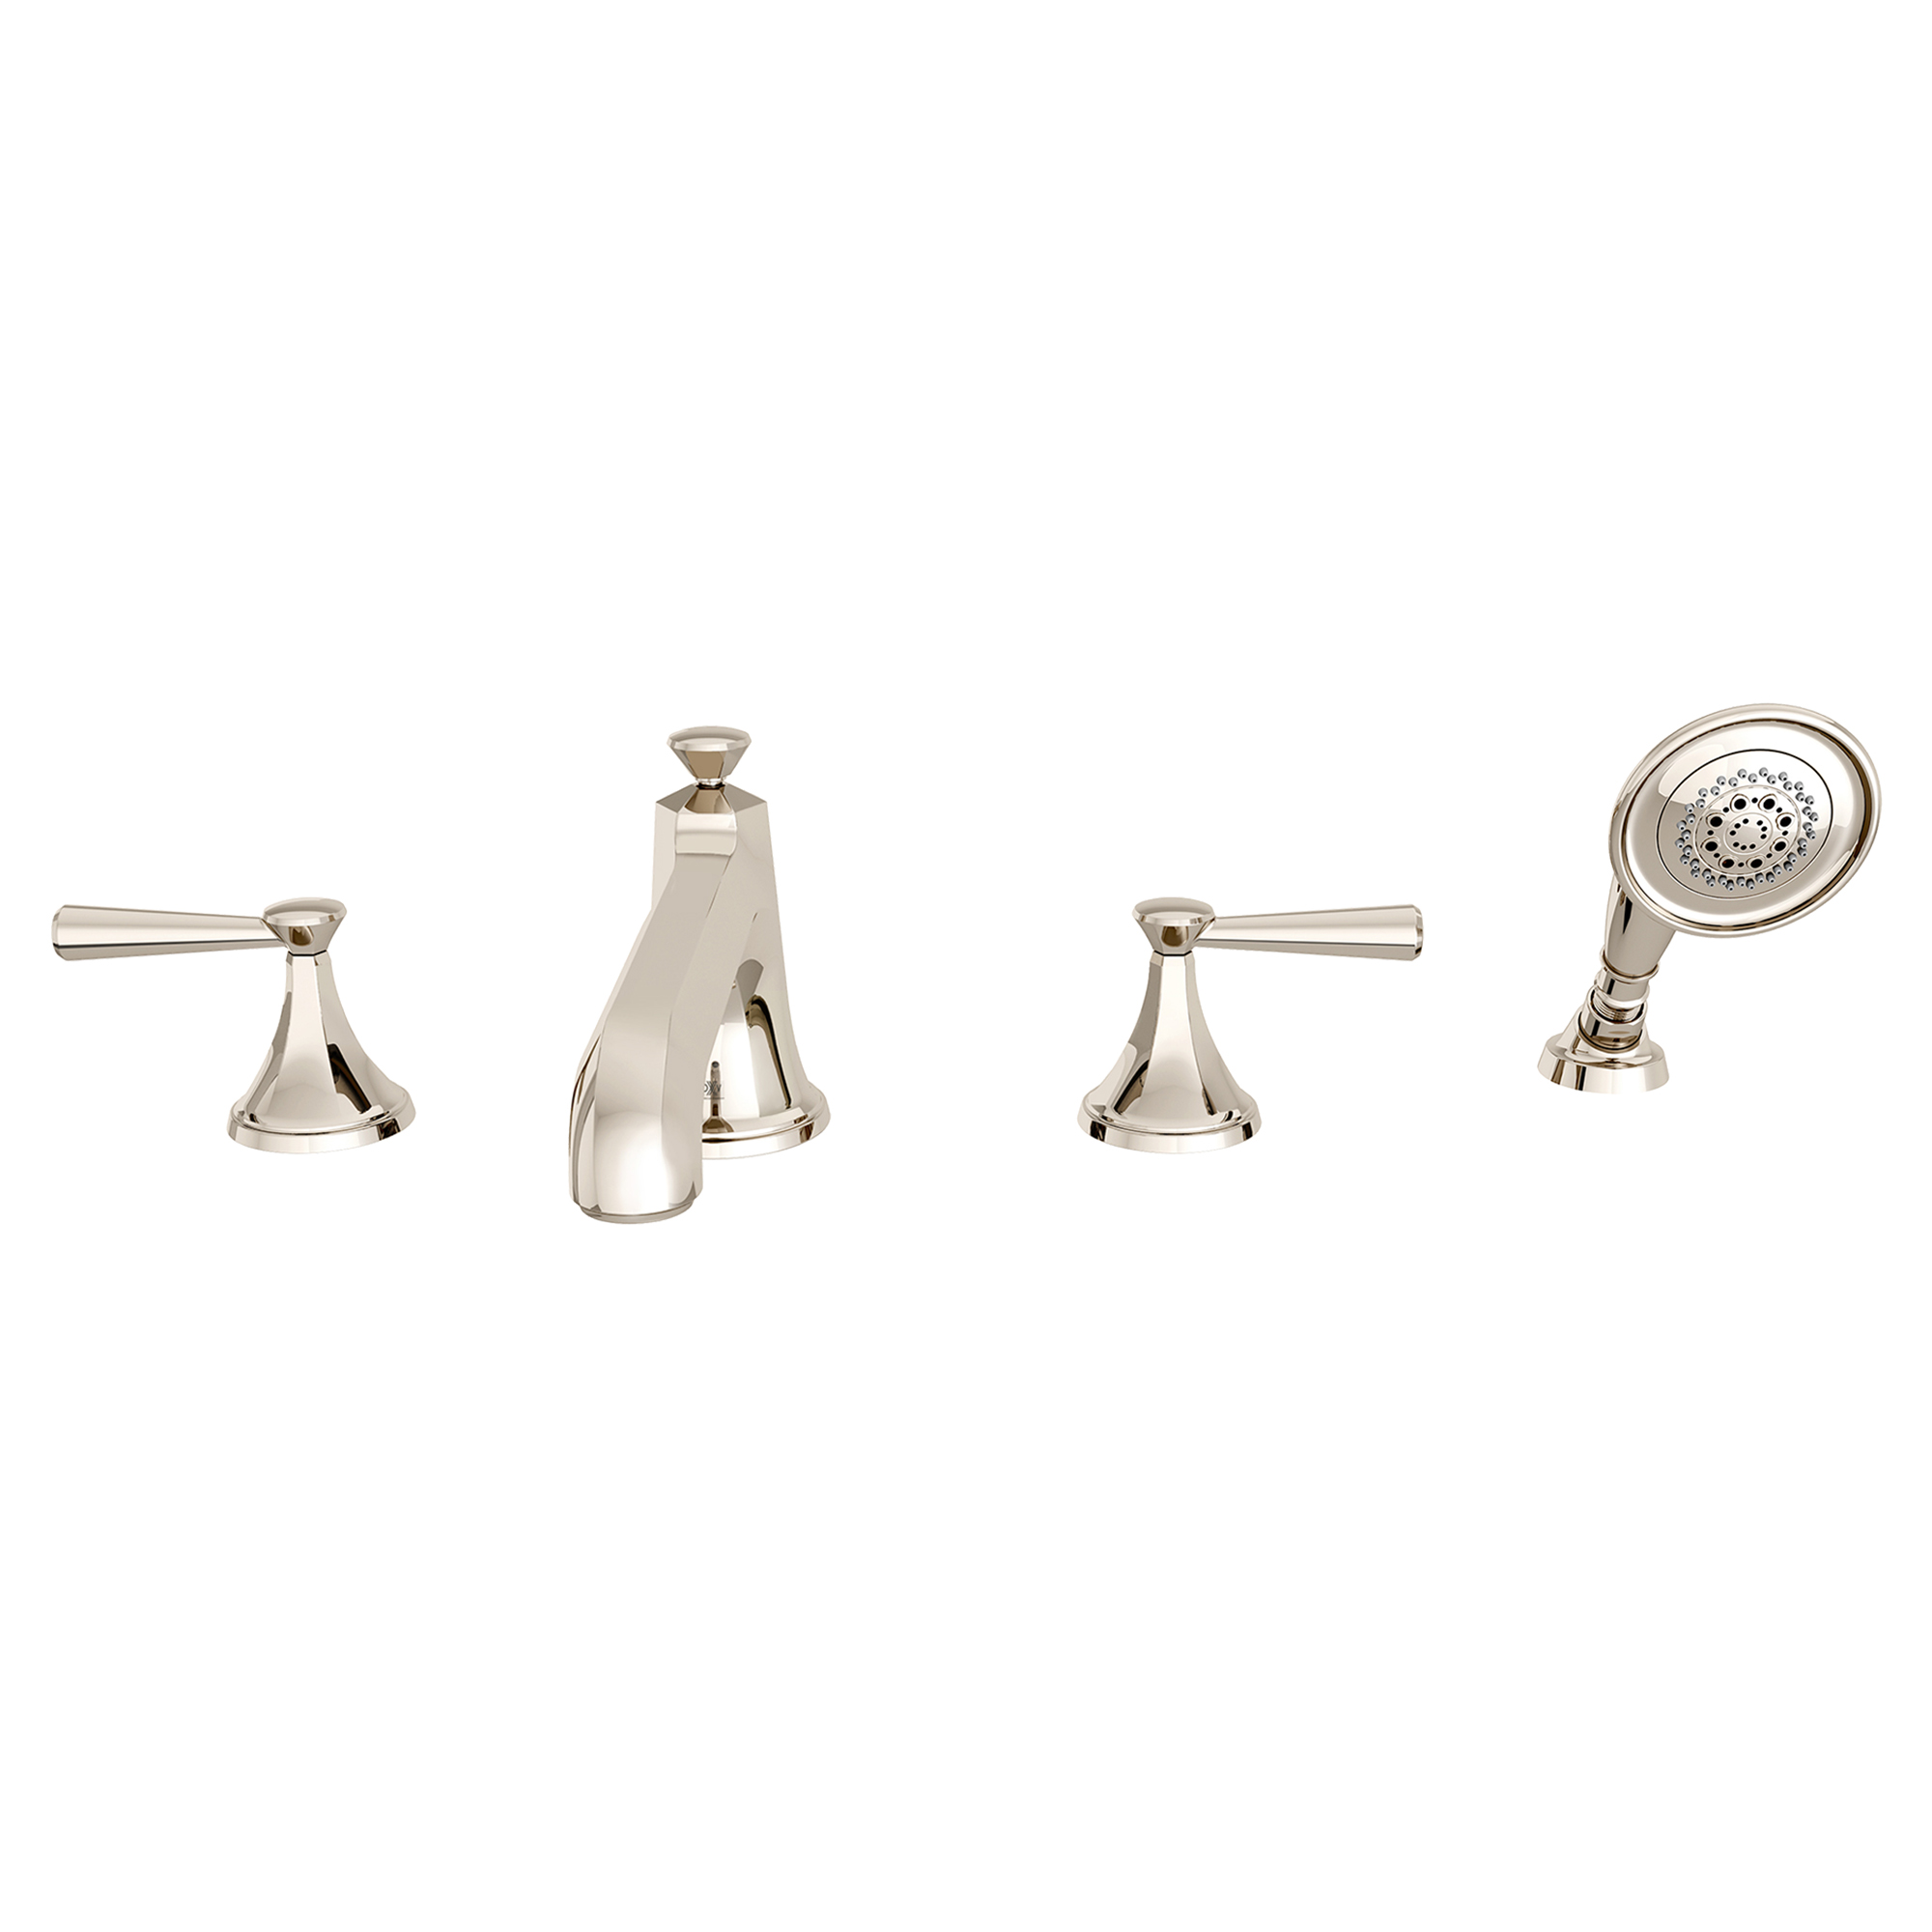 Fitzgerald 2-Handle Deck Mount Bathtub Faucet with Hand Shower and Lever Handles